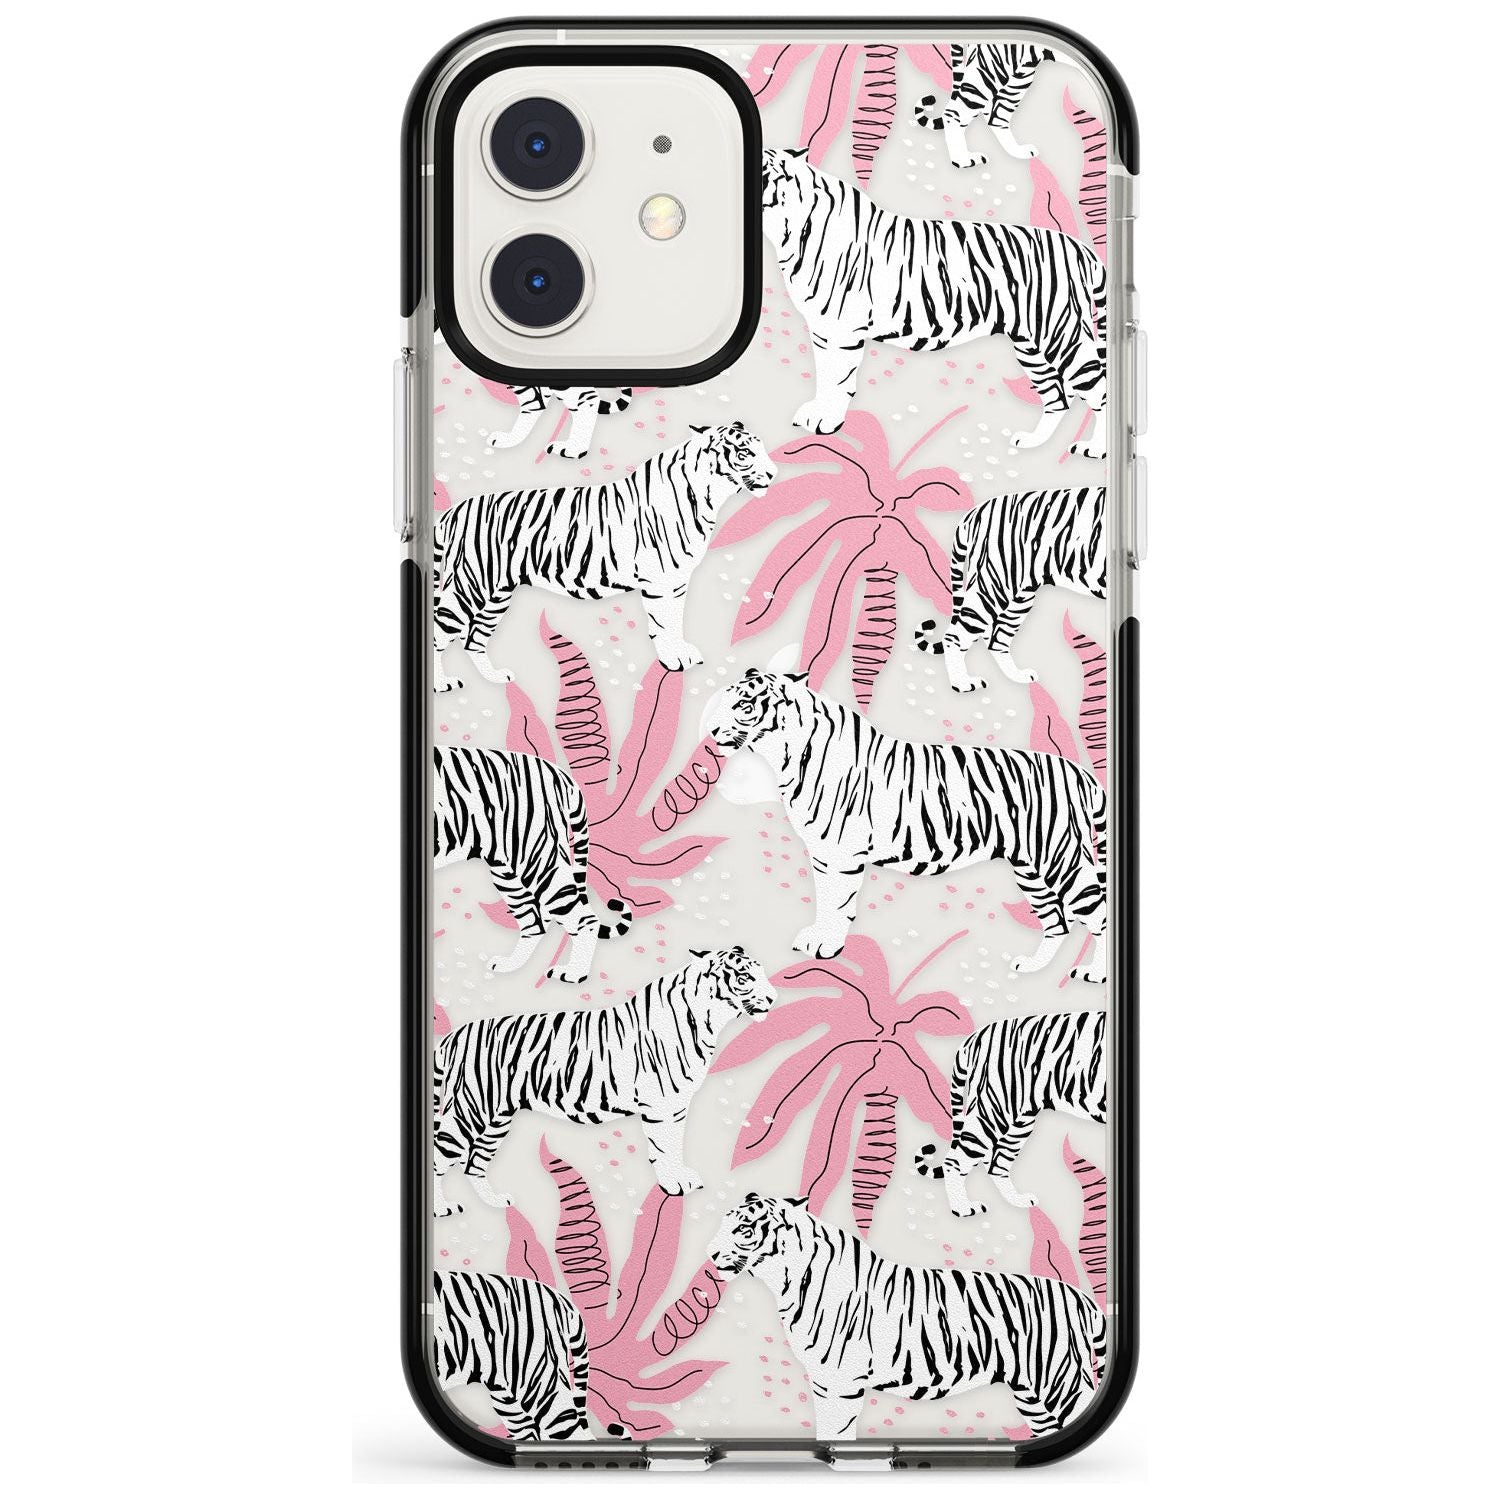 Tigers Within Black Impact Phone Case for iPhone 11